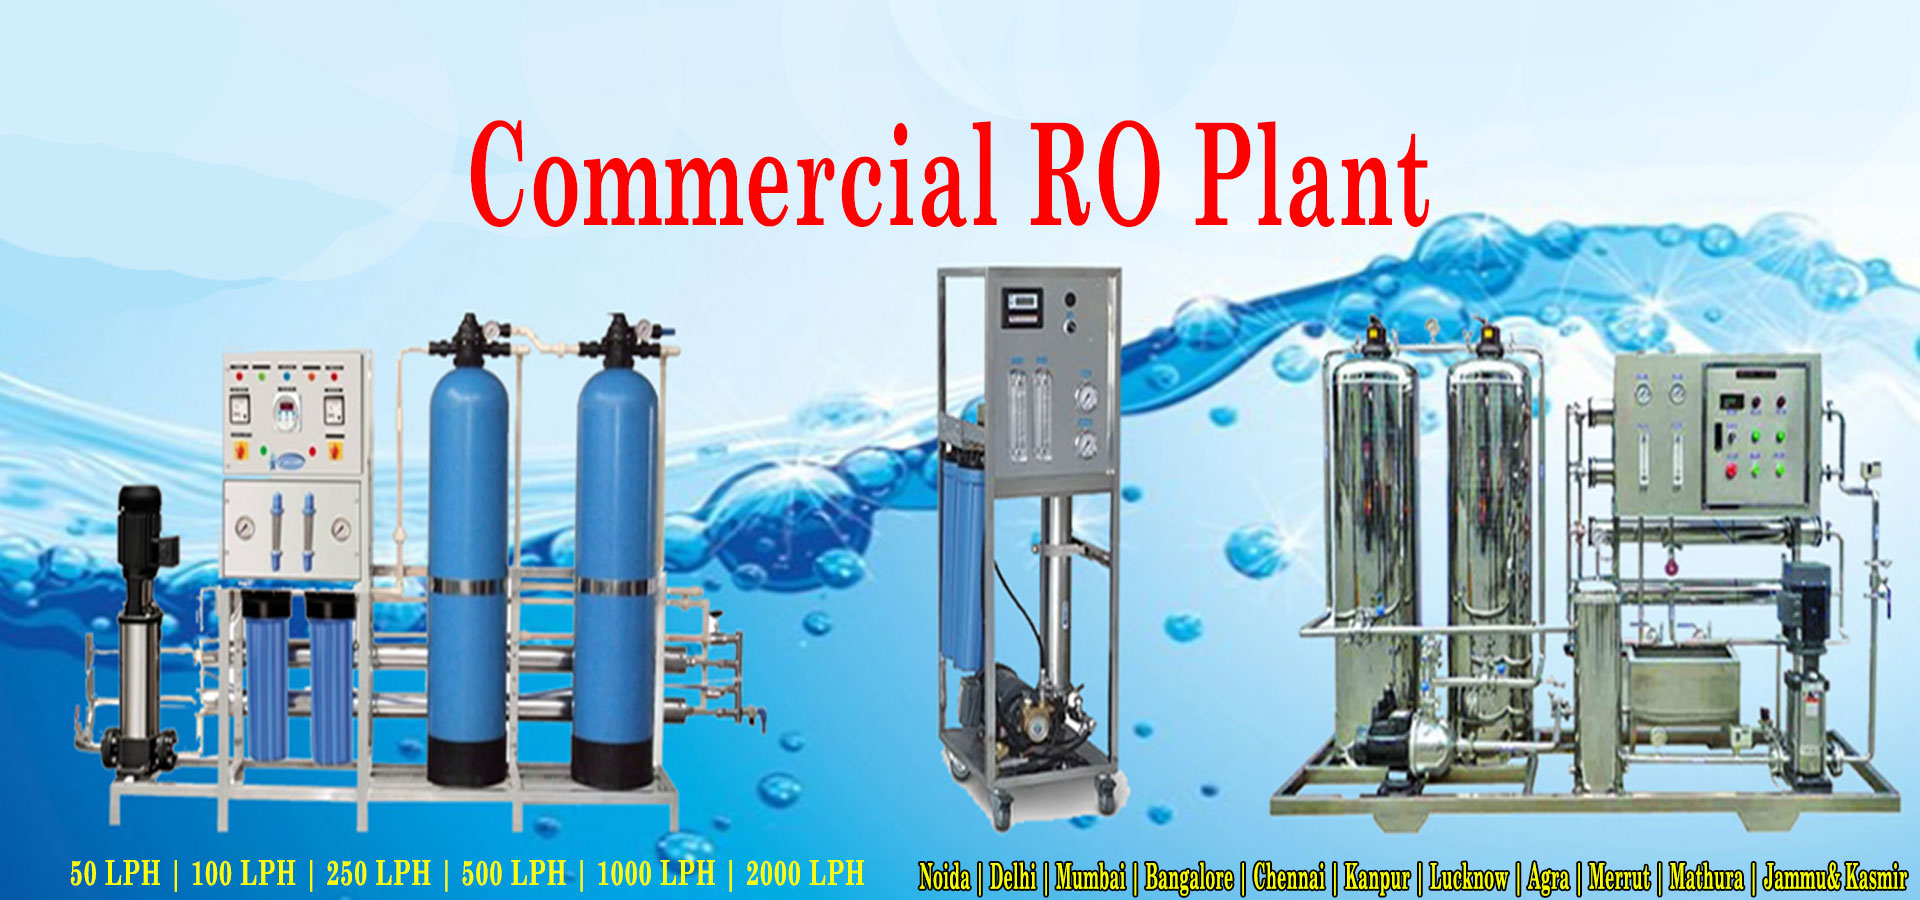 Commercial RO Plant: Manufacturer, Supplier in Delhi – NCR, India